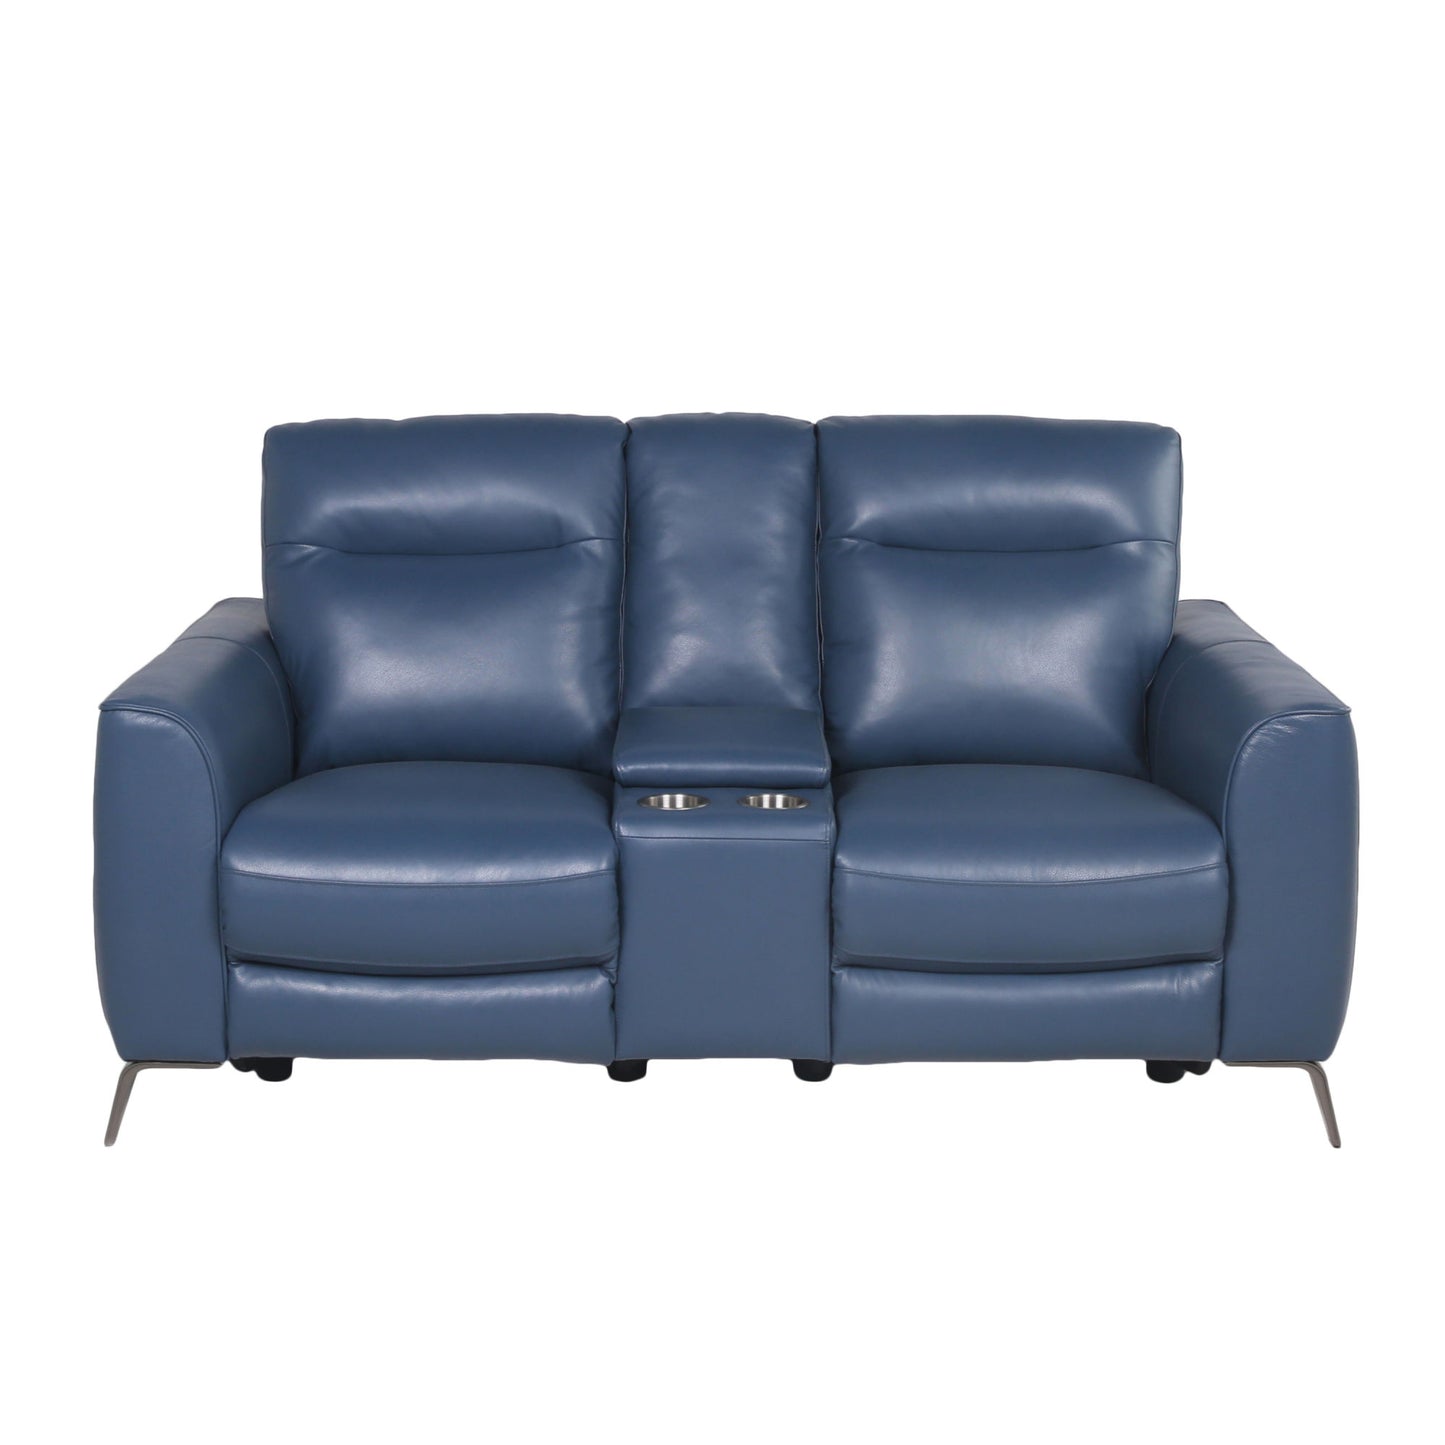 High-Leg Console Loveseat - Top-Grain Leather, Dual-Power, Ocean Blue Color - Stowaway Footrest, Flaired Chrome Leg, Motion Furniture Look